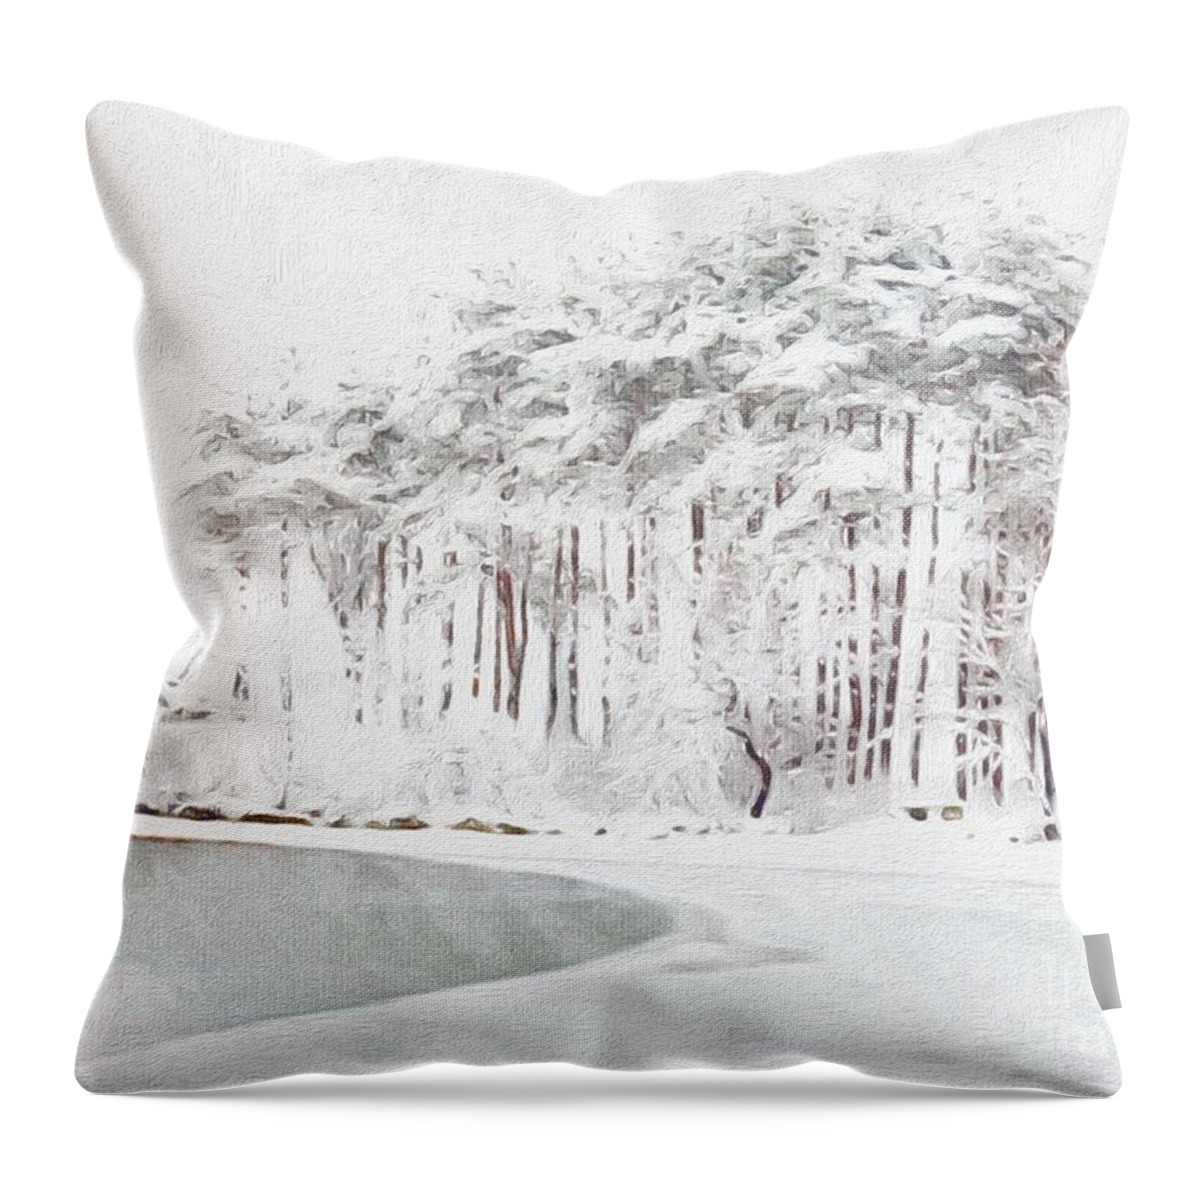 The Storm Is Over Throw Pillow featuring the photograph The Storm Is Over by Marcia Lee Jones